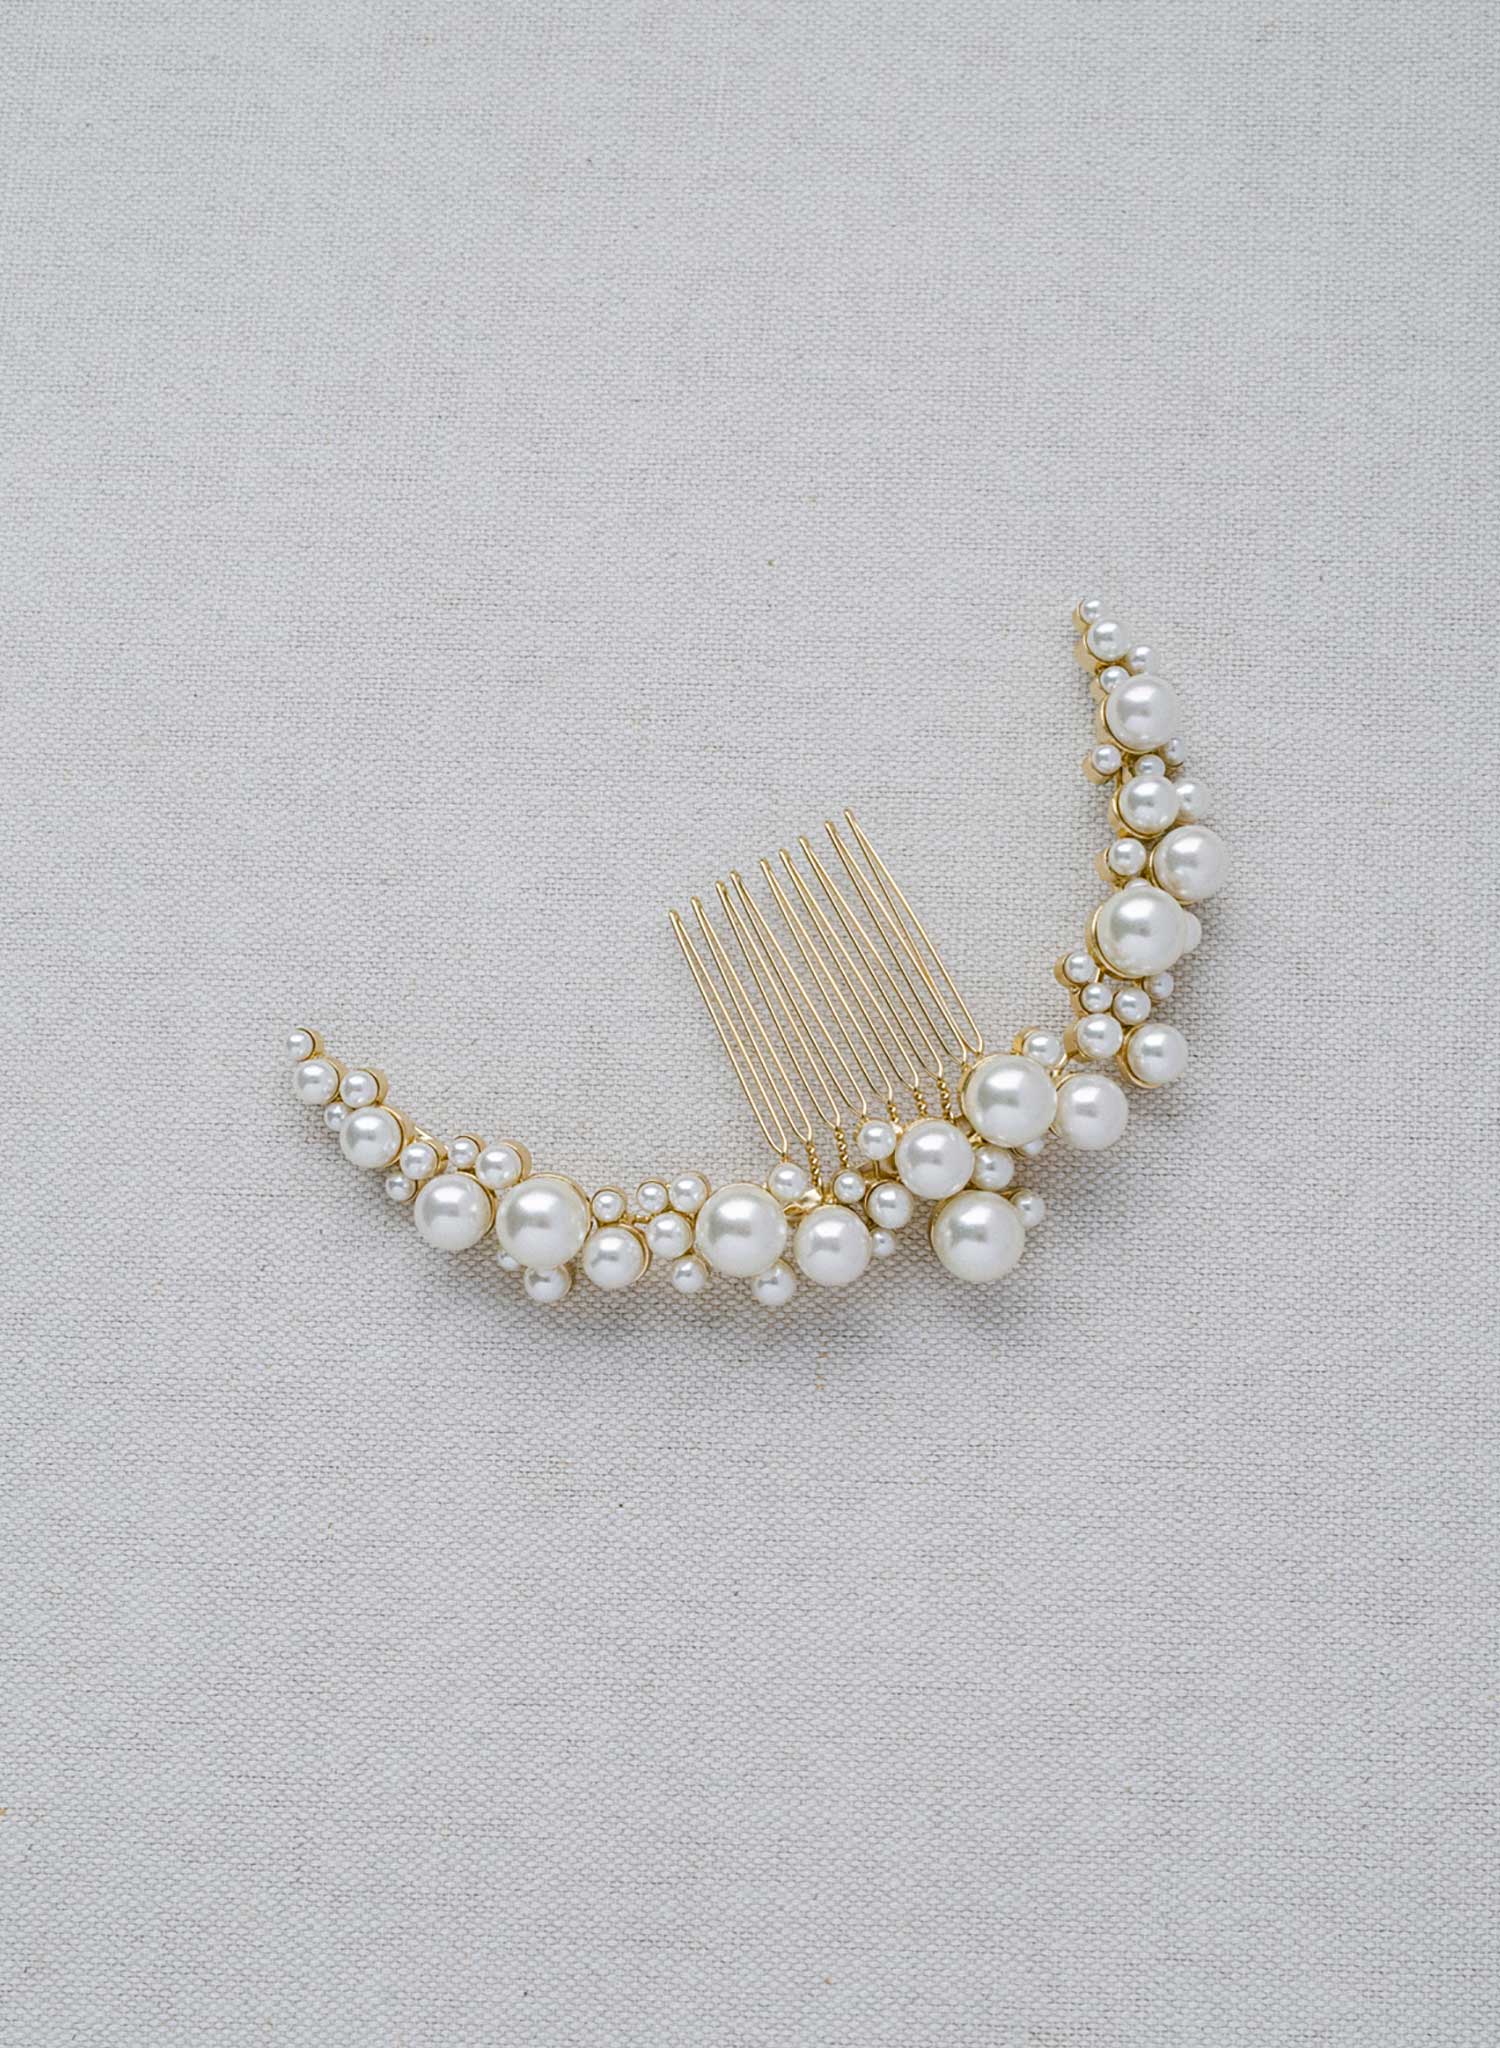 Pearl droplets hair comb - Style #2423